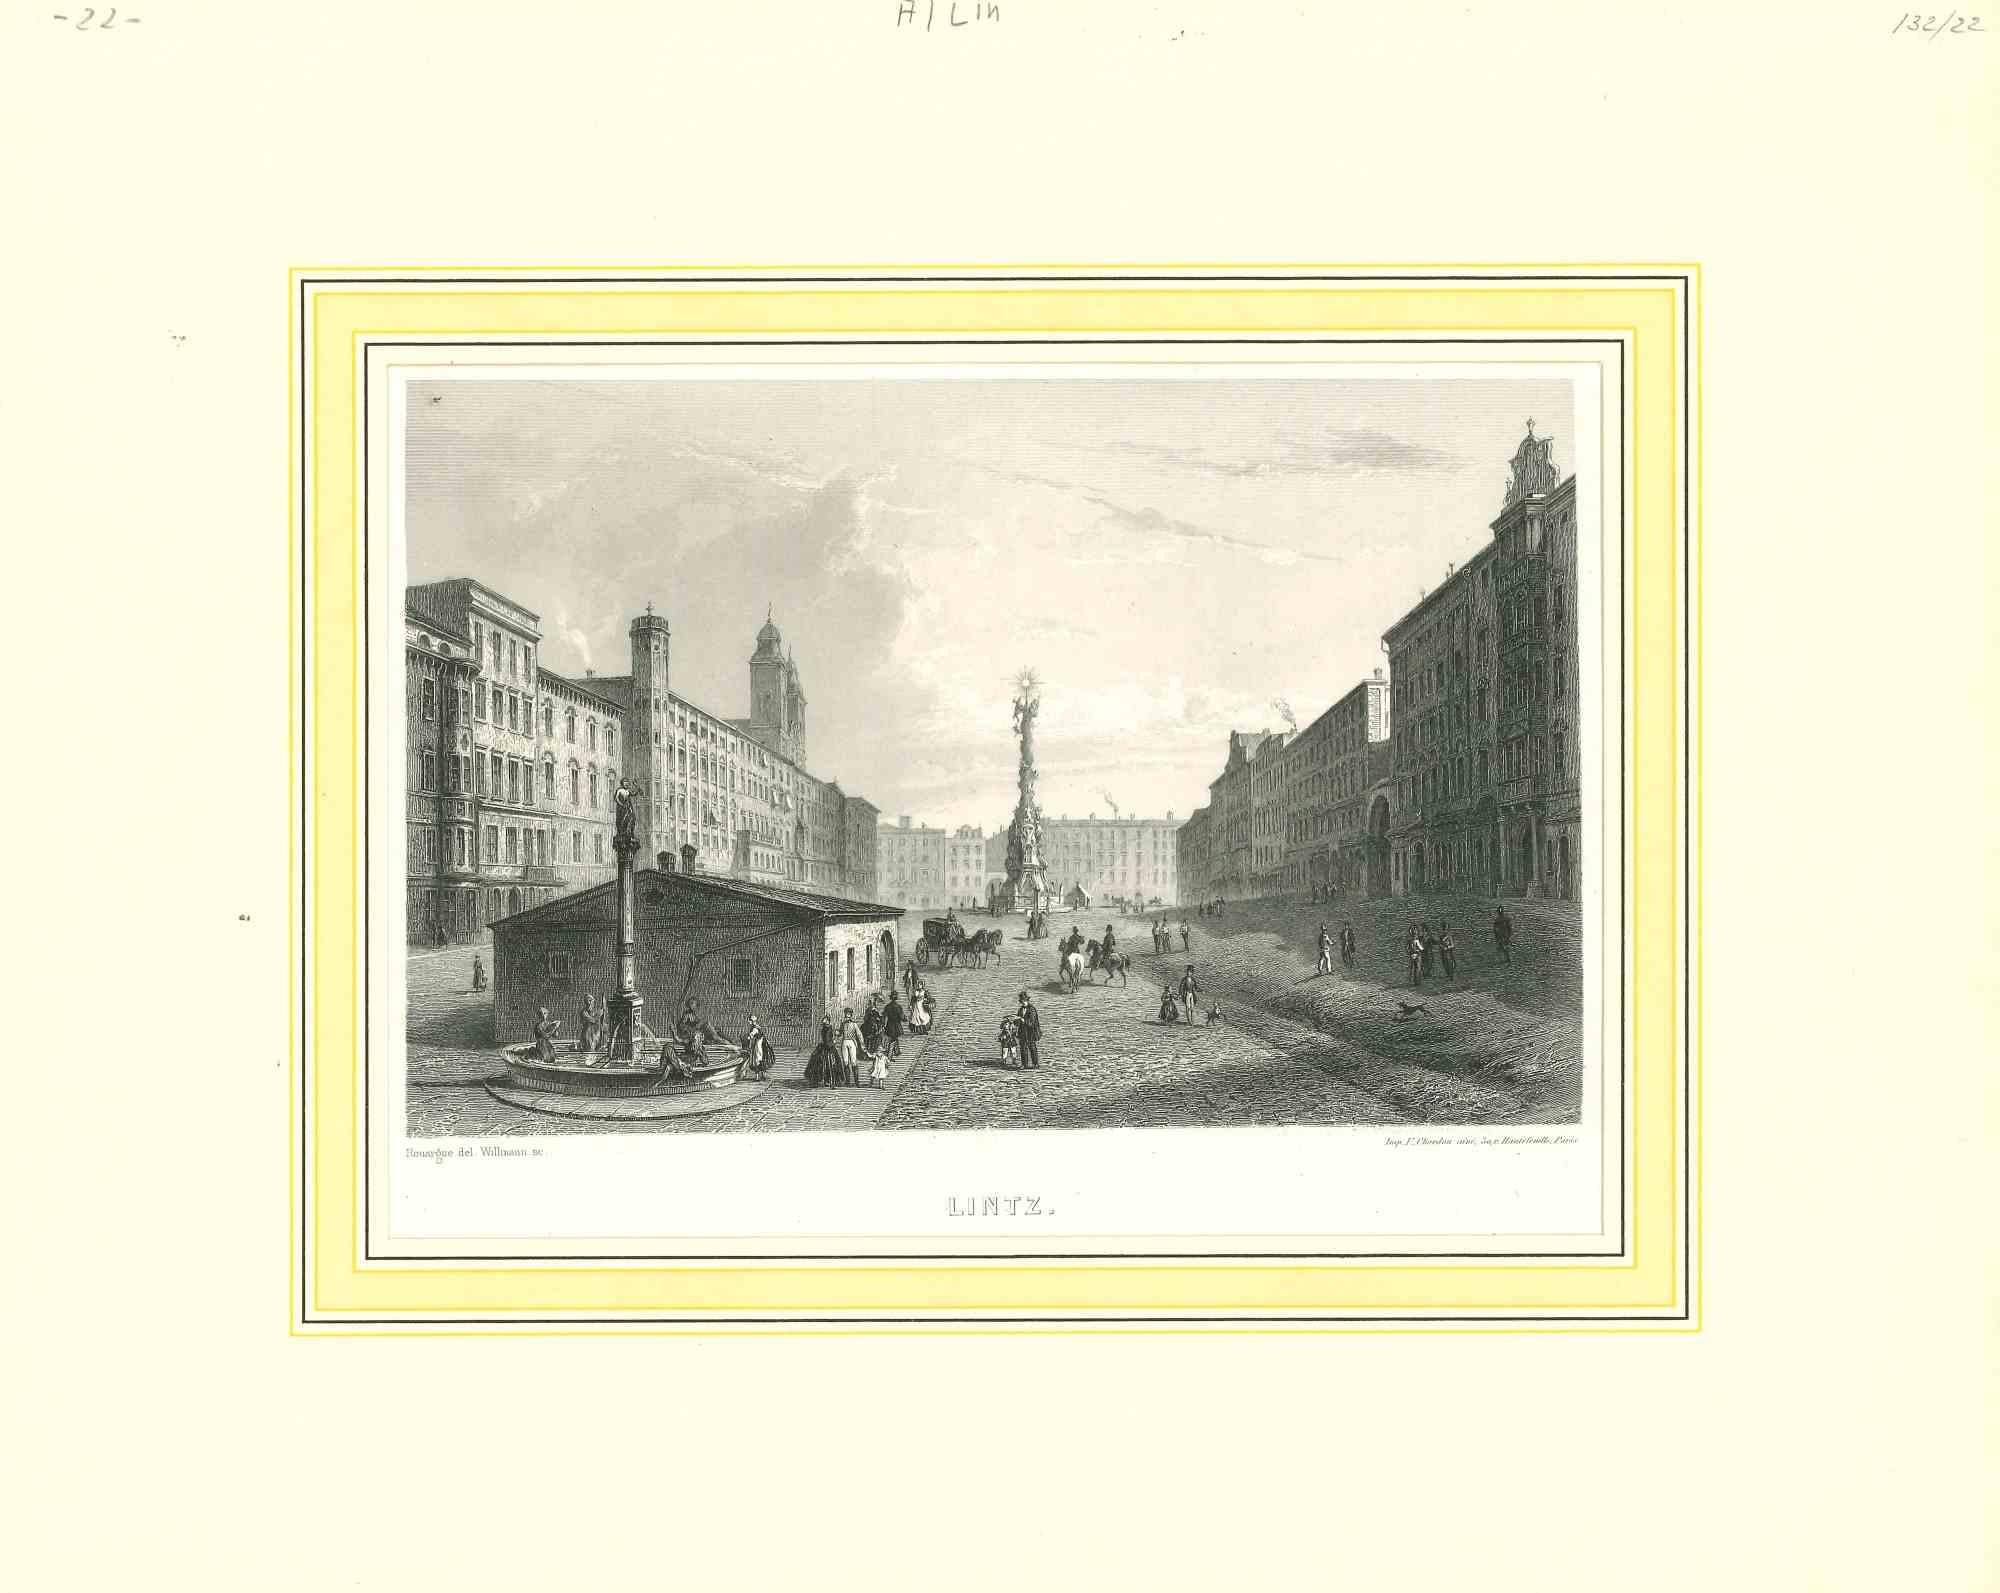 Ancient View of Lintz - Original Lithograph - Mid- 19th Century